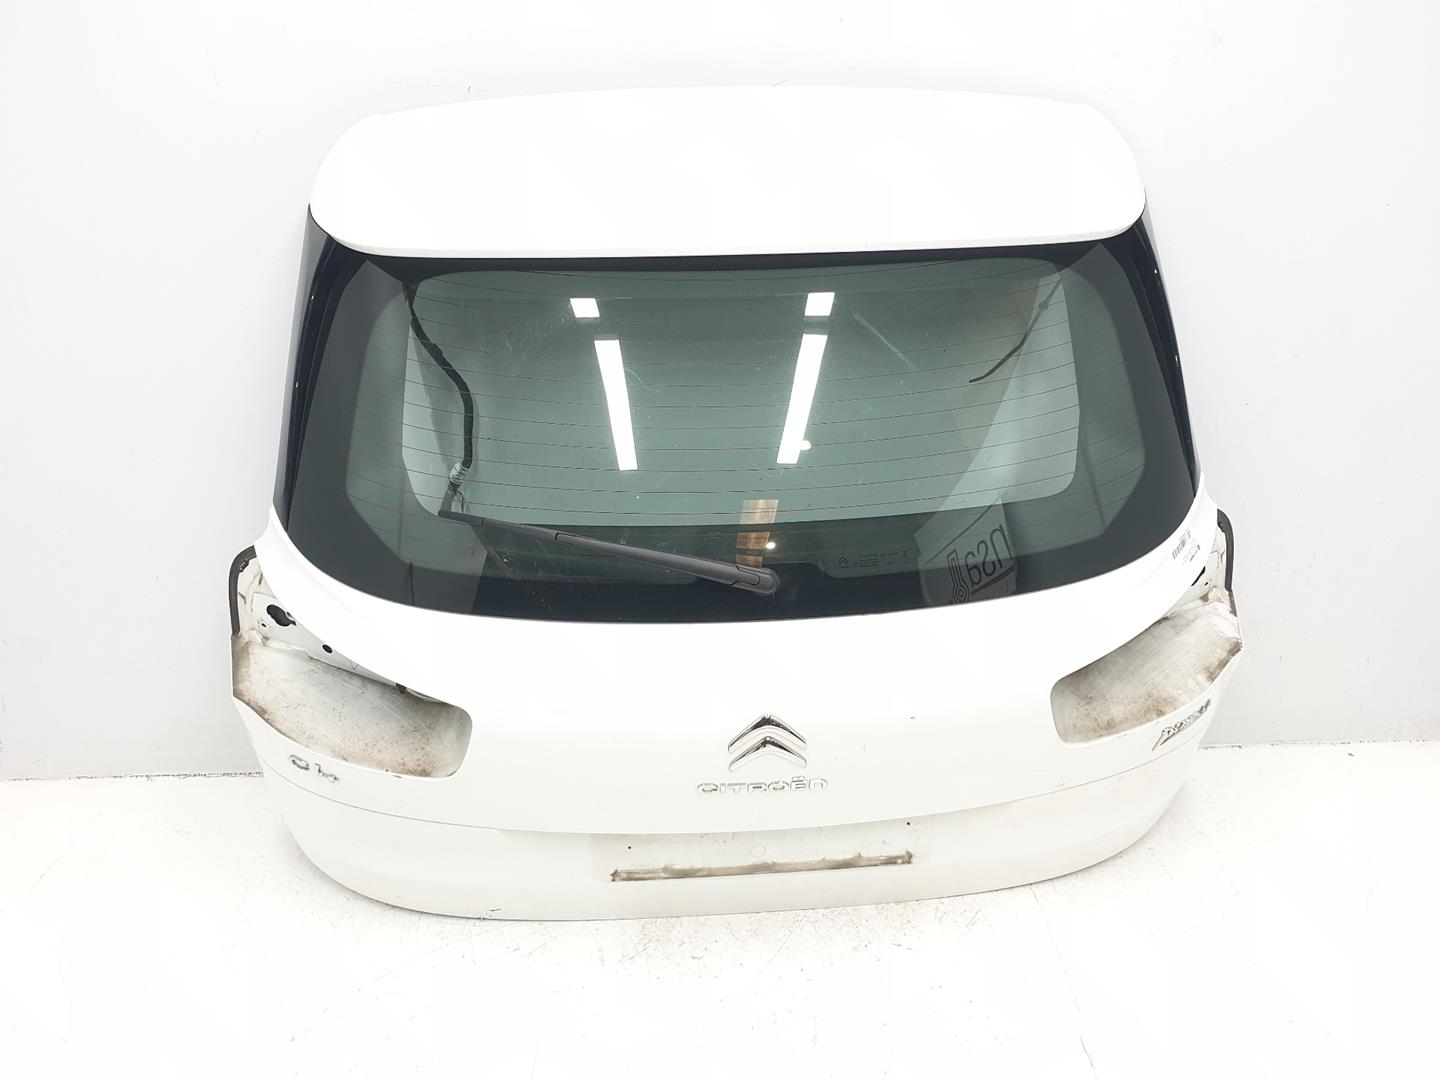 CITROËN C4 Picasso 2 generation (2013-2018) Bootlid Rear Boot 1609347780, COLORBLANCO, 1161CB 24242577